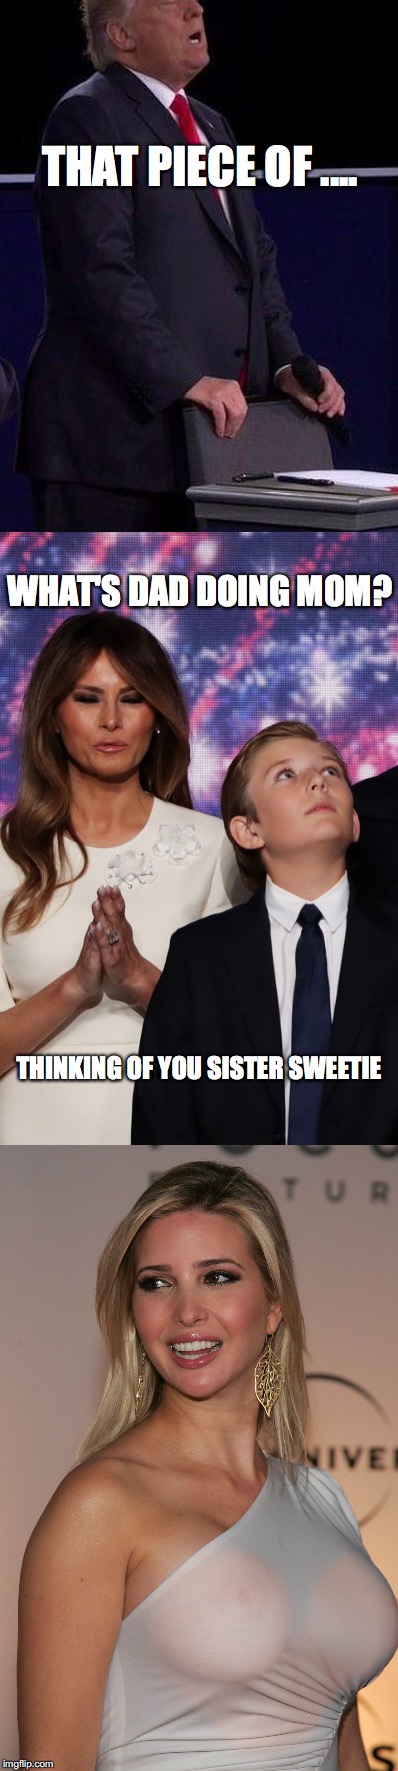 Trump Humps Chair | THAT PIECE OF .... WHAT'S DAD DOING MOM? THINKING OF YOU SISTER SWEETIE | image tagged in trump,ivanka,melania,piece of ass | made w/ Imgflip meme maker